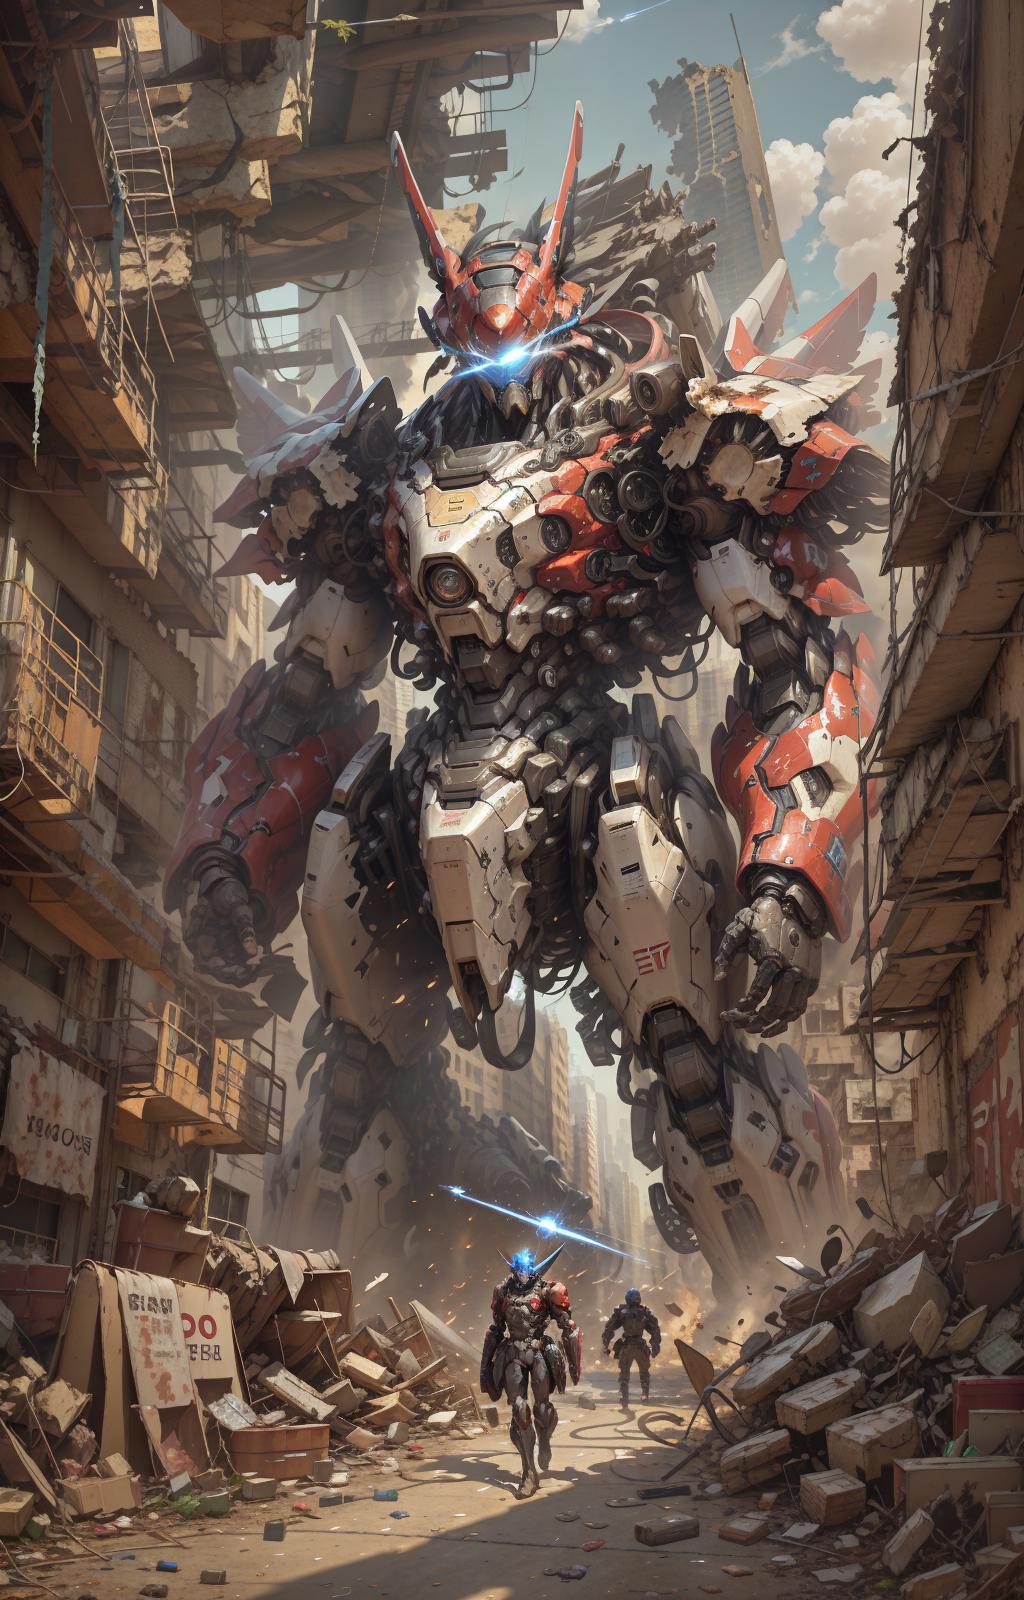 The Battle for Justice: A Giant Robot Fights for the City